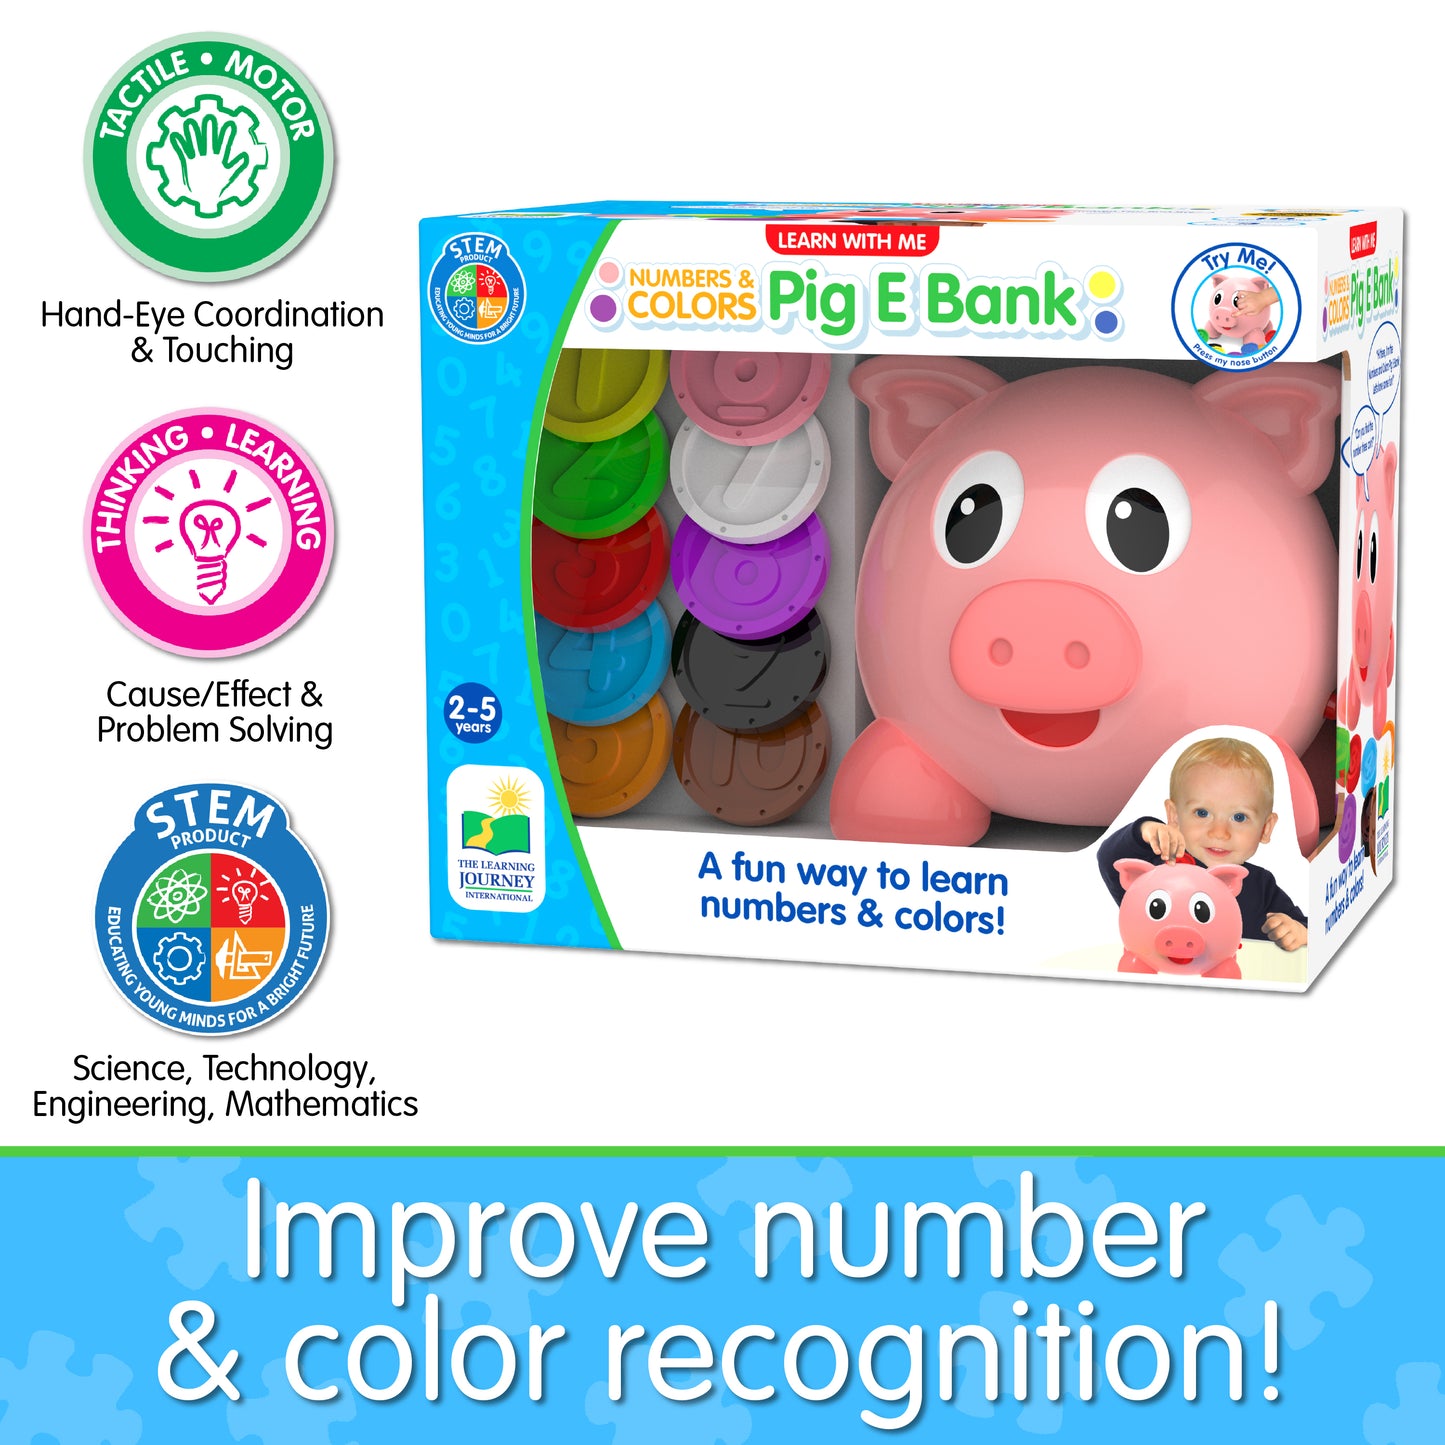 Infographic of Learn With Me Numbers and Colors Pig E Bank's educational benefits that reads, "Improve number and color recognition!"